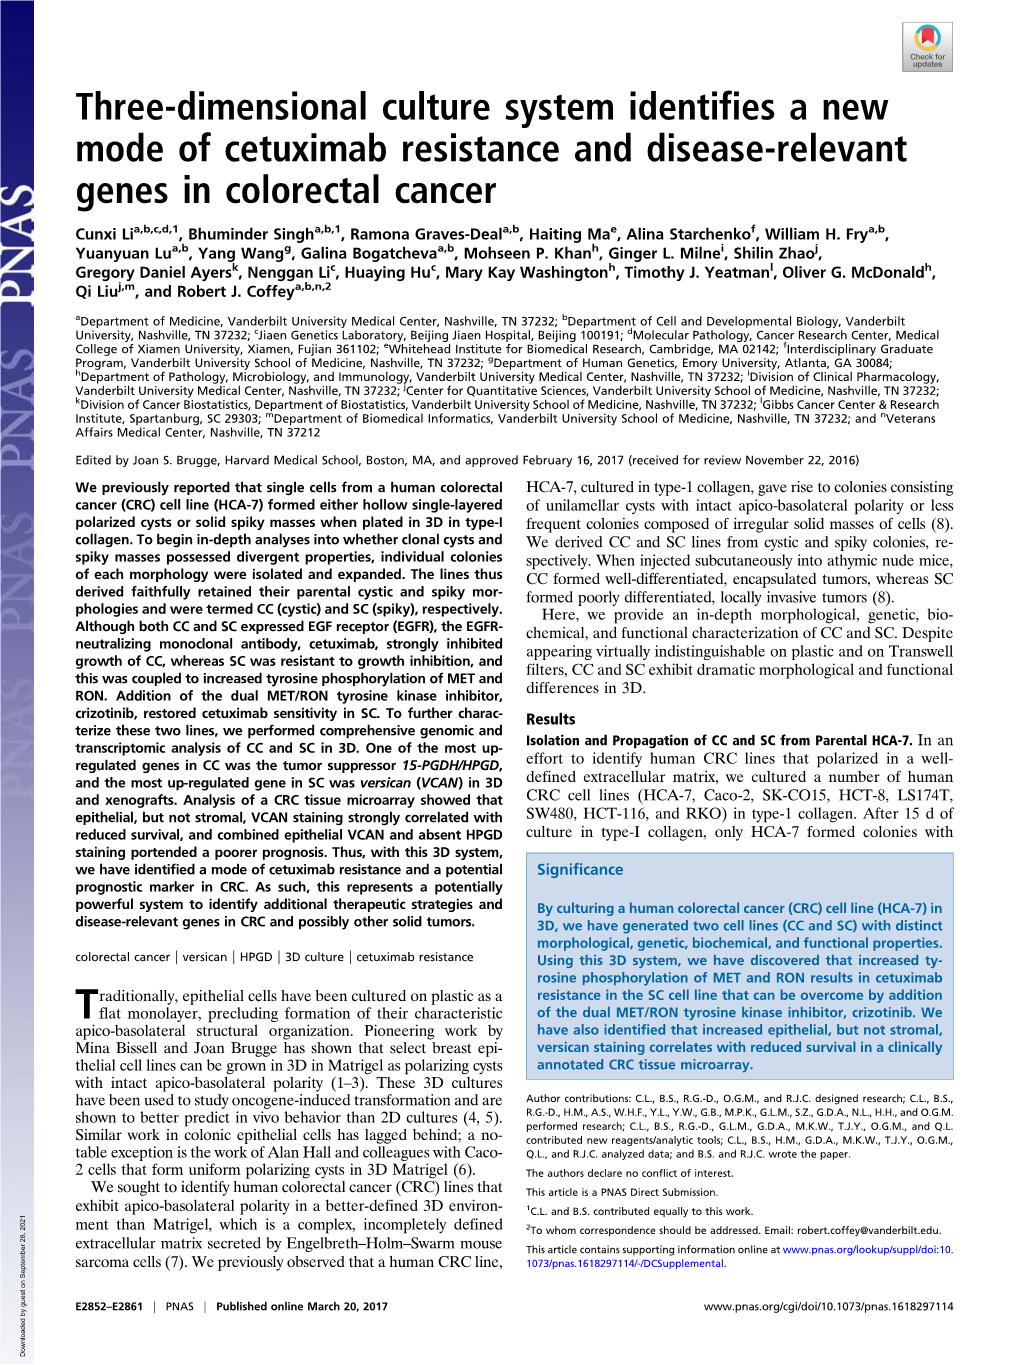 Three-Dimensional Culture System Identifies a New Mode of Cetuximab Resistance and Disease-Relevant Genes in Colorectal Cancer